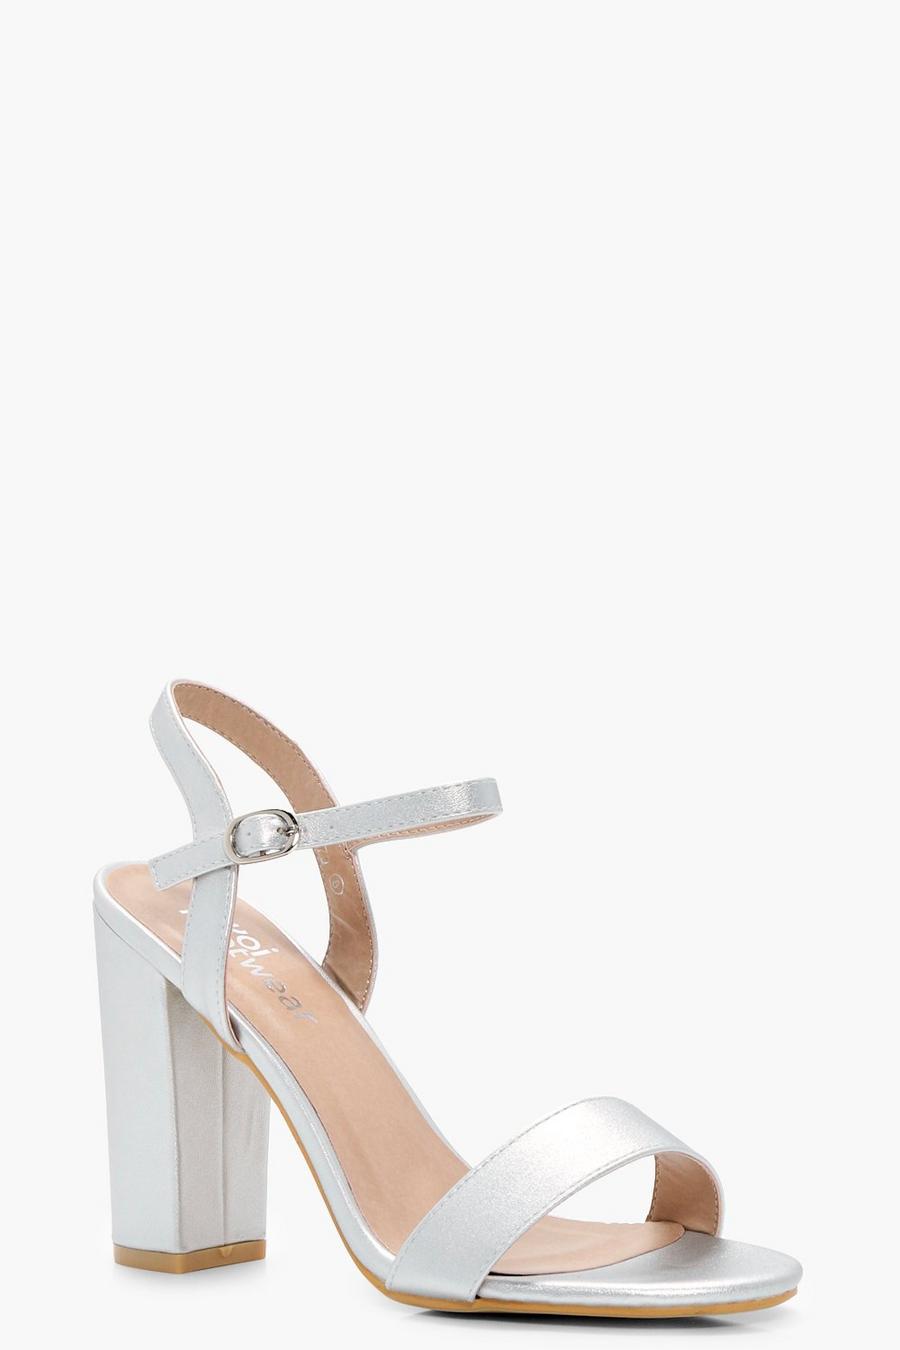 Silver Block Heel Barely There Heels